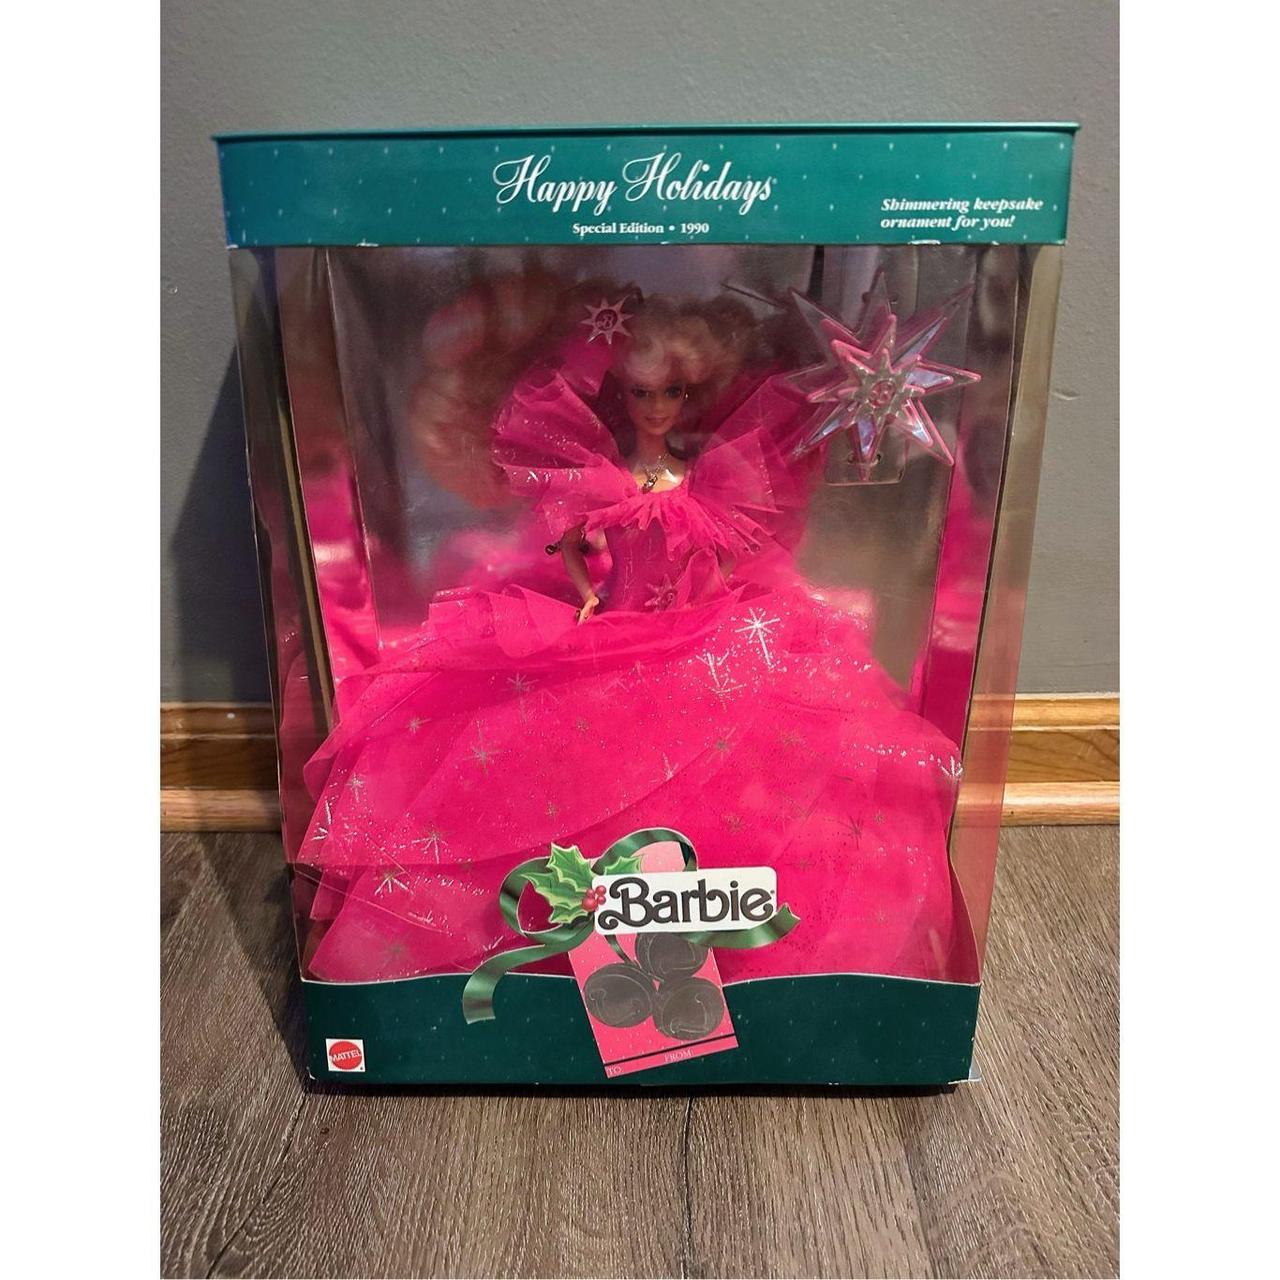 Disney Princess Barbie doll collectibles from 1990's - Depop